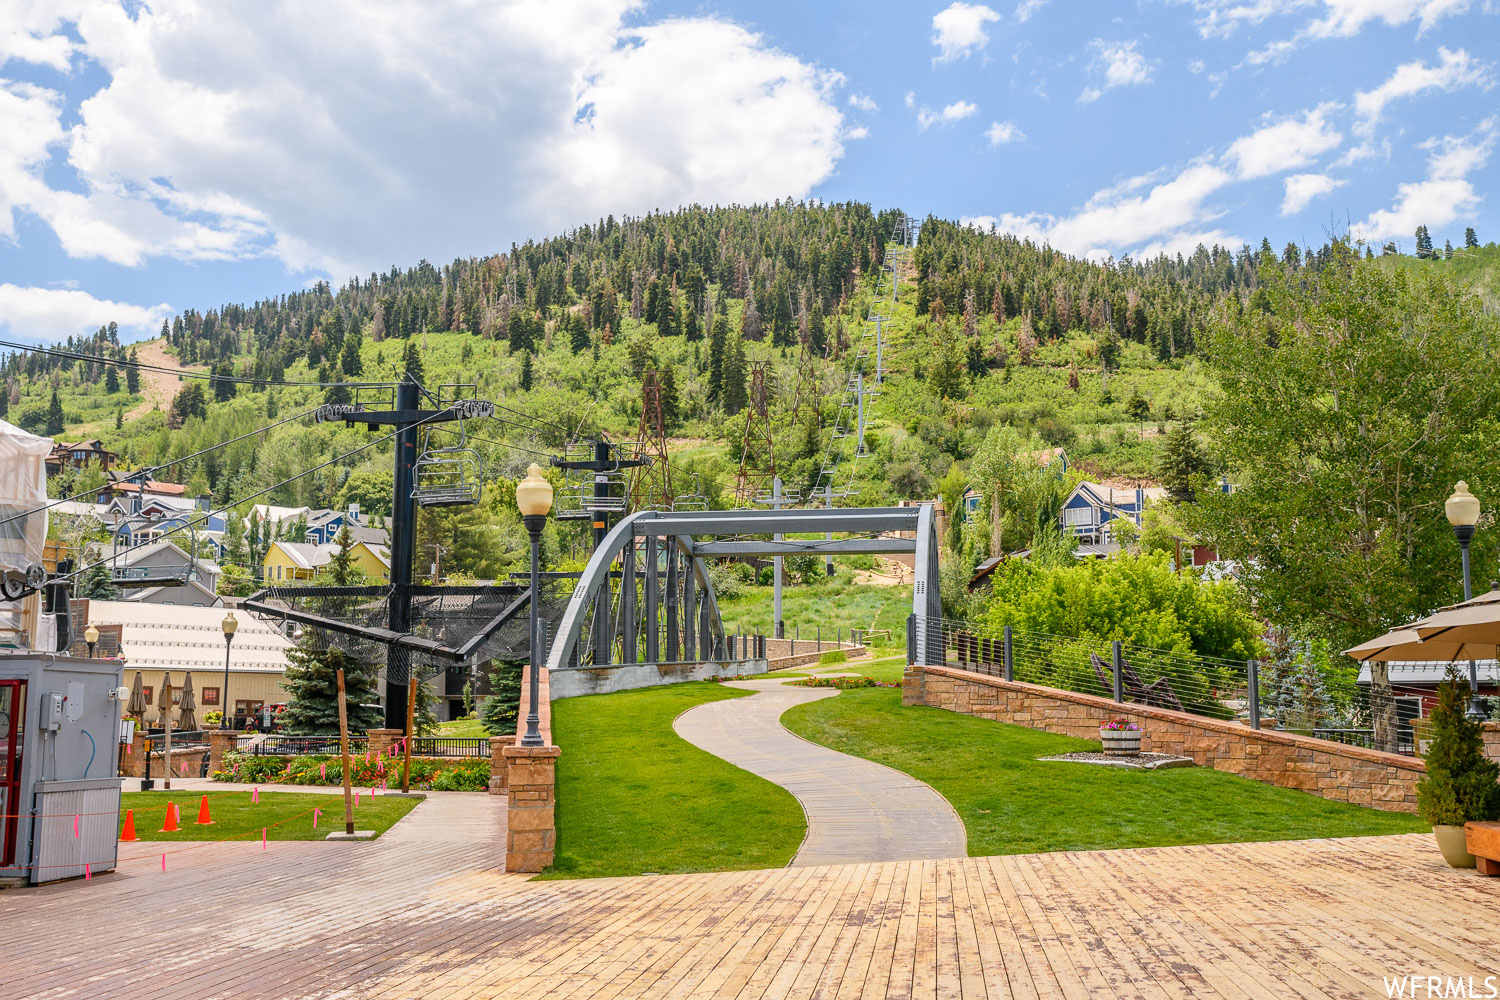 1011 A EMPIRE, Park City, Utah 84060, 4 Bedrooms Bedrooms, 18 Rooms Rooms,2 BathroomsBathrooms,Residential,For sale,A EMPIRE,1883977